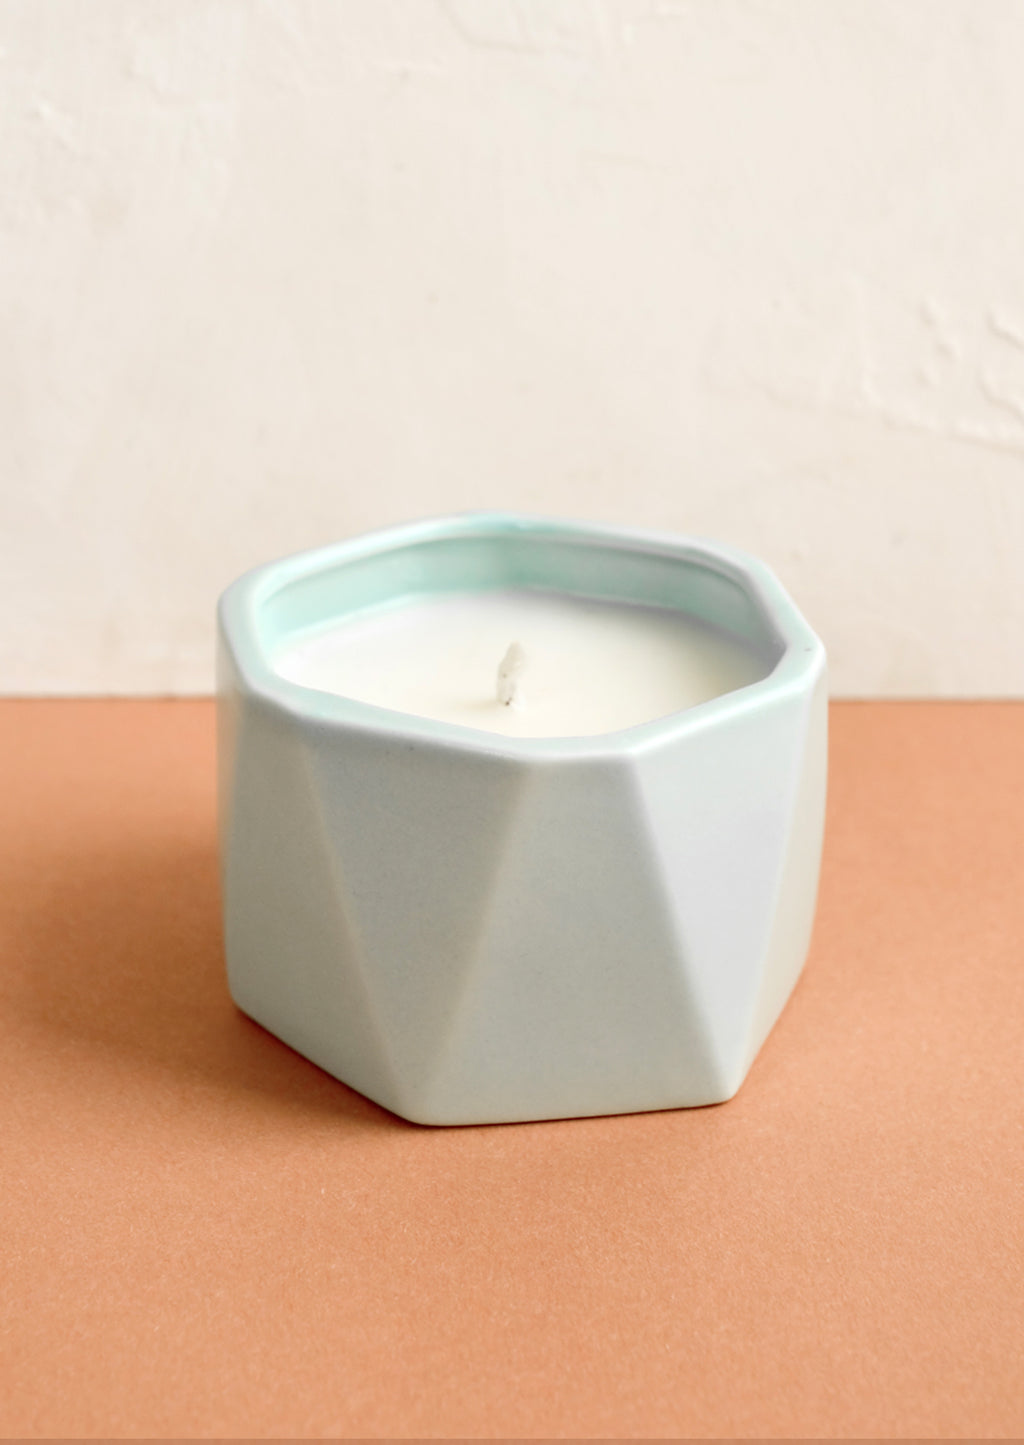 Fresh Sea Salt: A small candle in light blue faceted ceramic vessel.